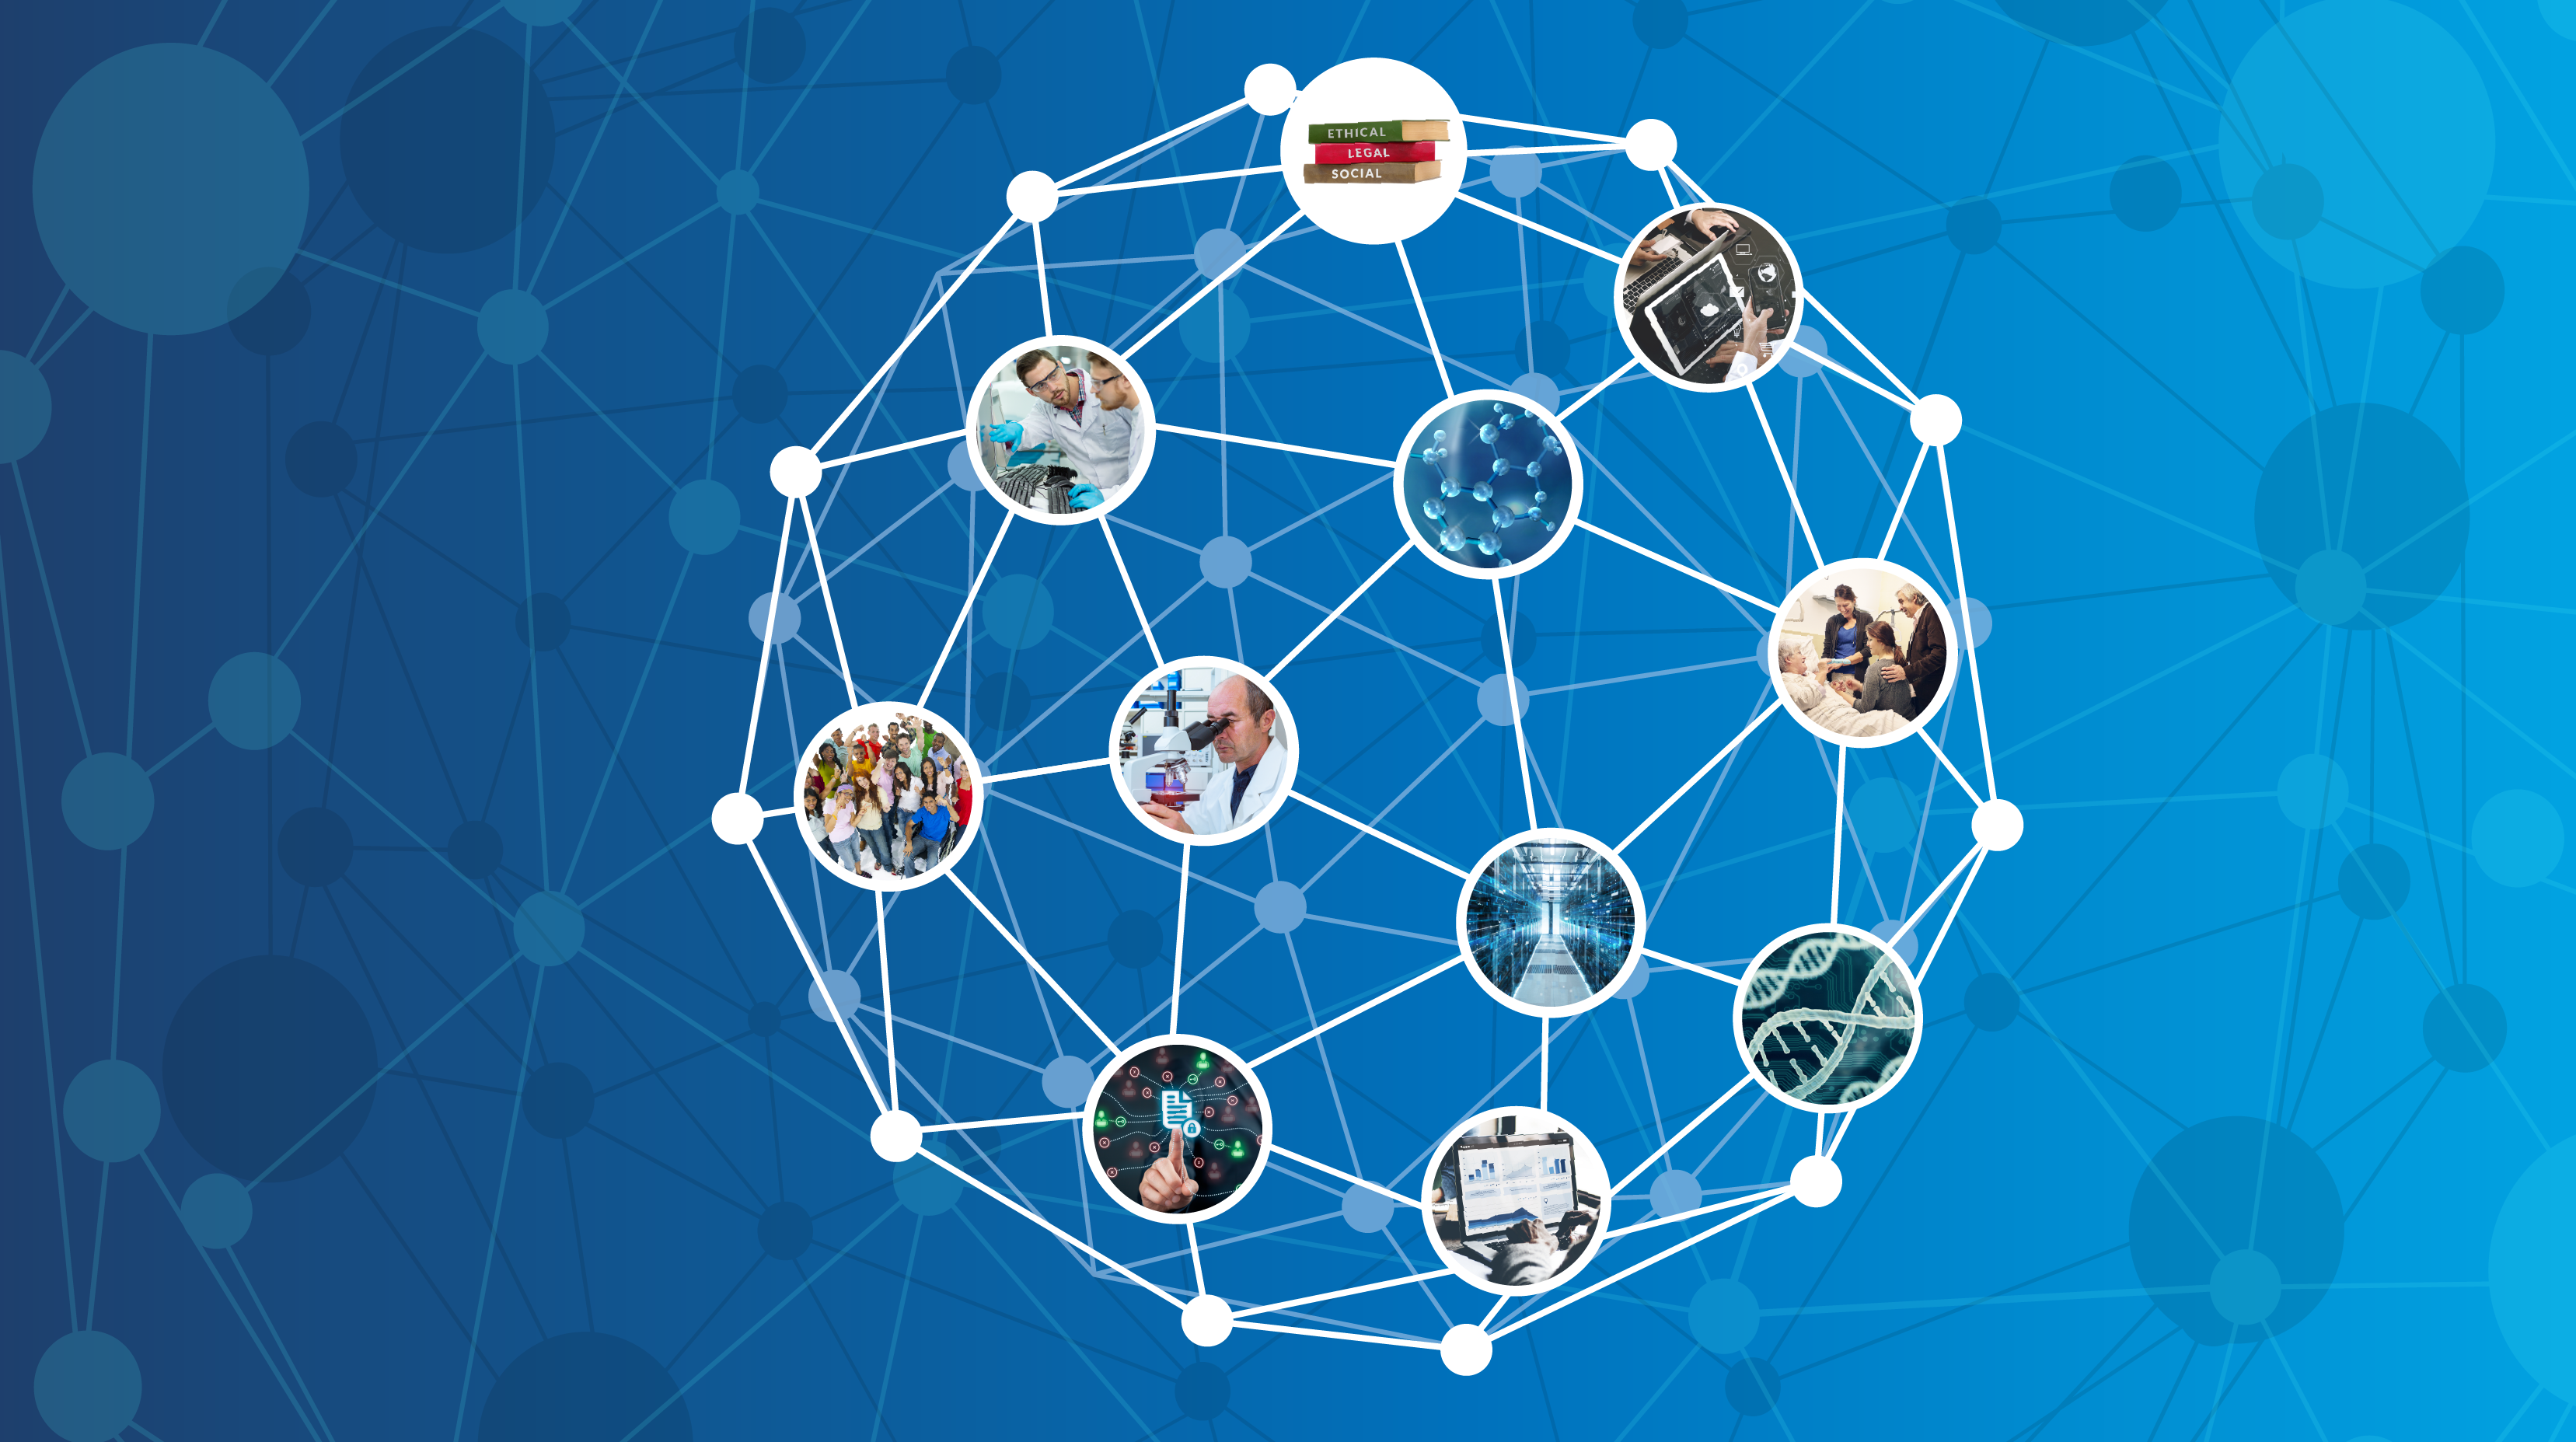 Blue background with white graphic in the middle, multiple circles connected by lines, each circle has a unique image in it which includes scientists and doctors at work, DNA strand, laptop, finger pointing in the air, group of young people smiling.